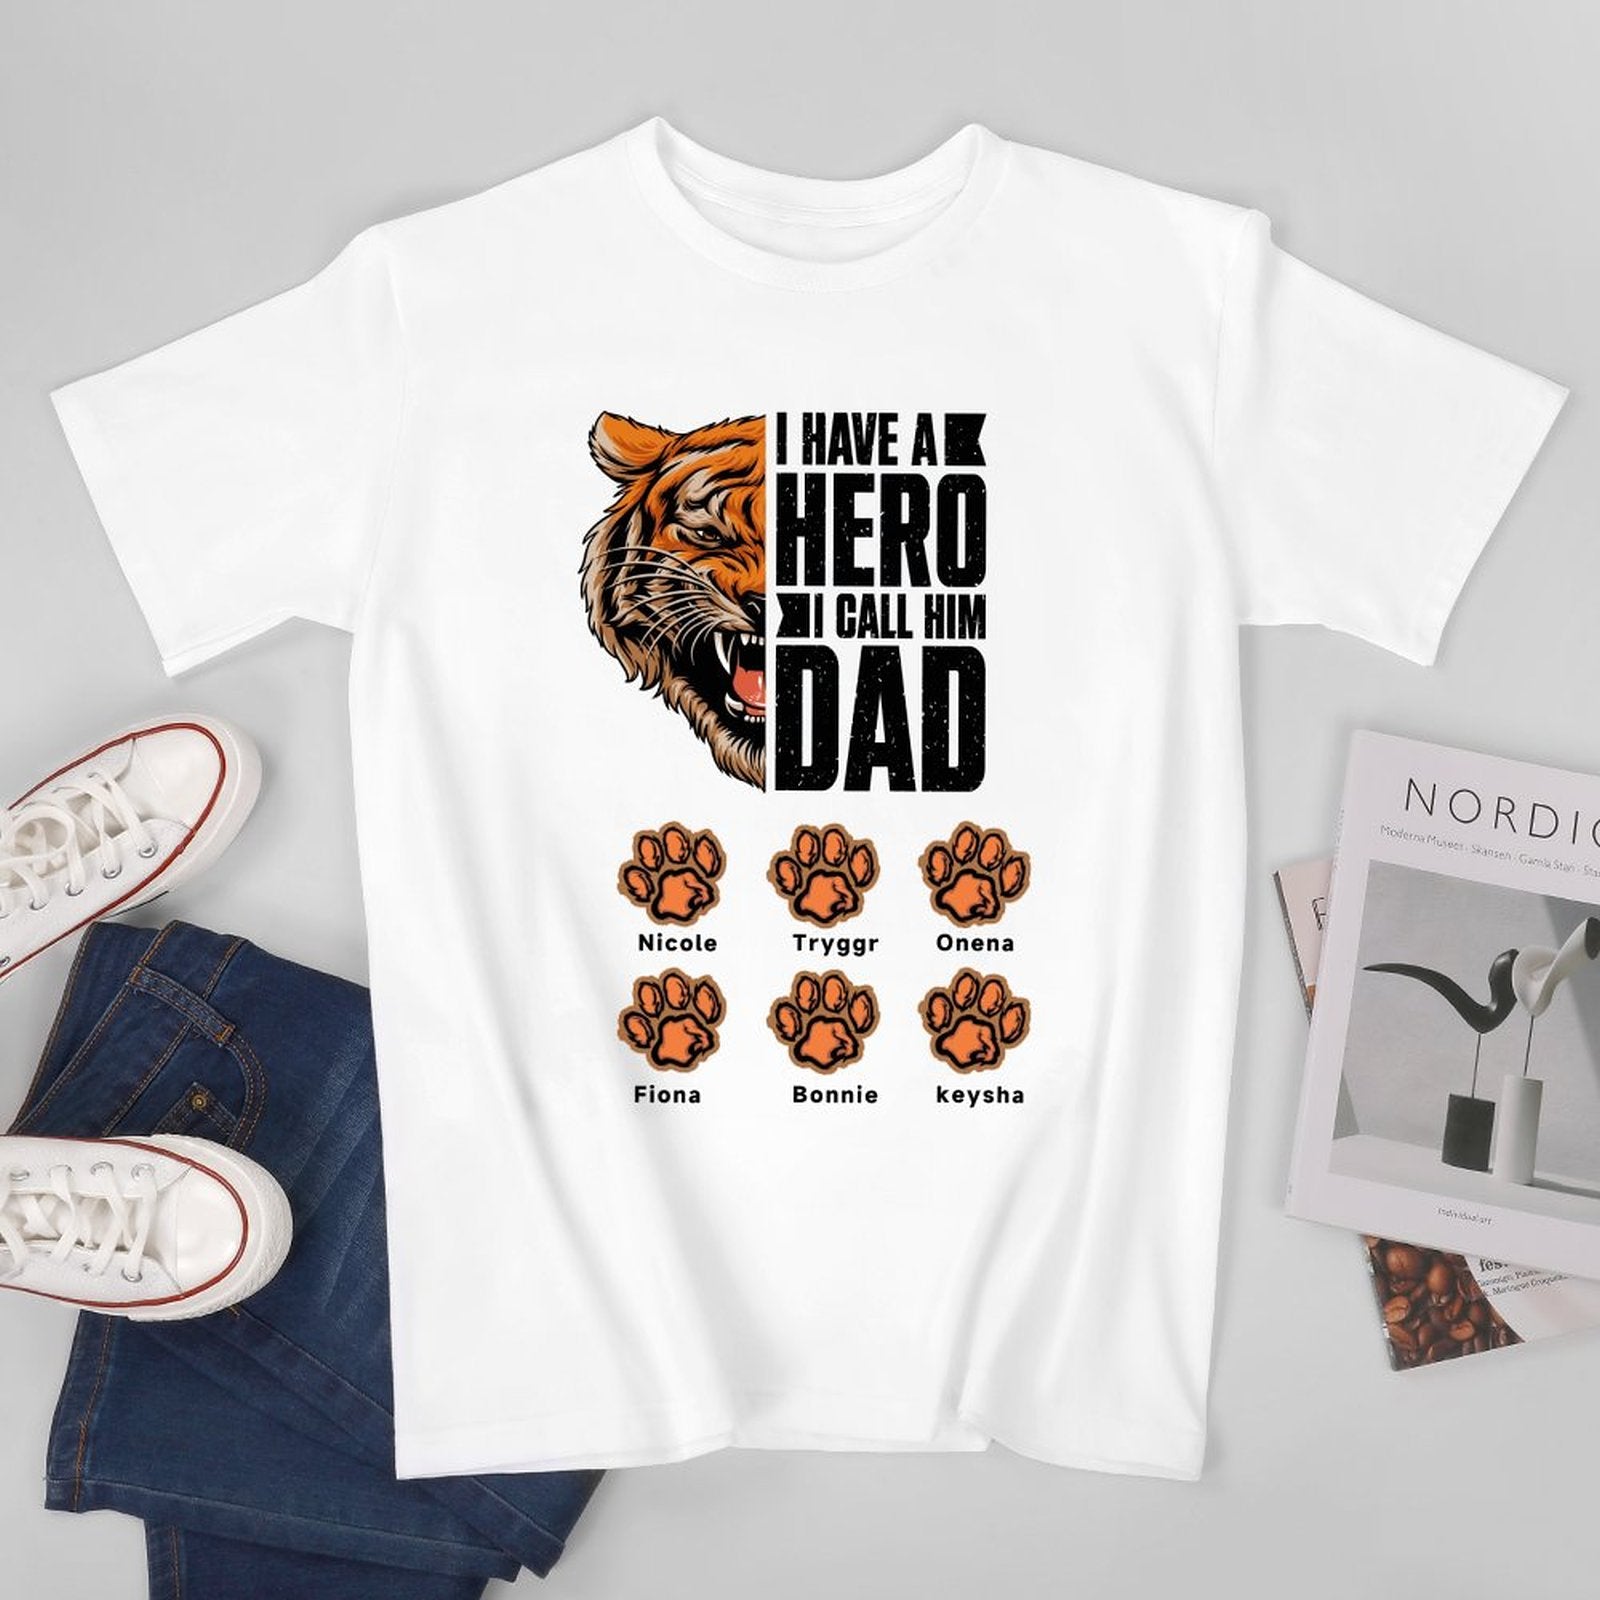 Personalized Dad Tiger Shirt , I Have a Hero I Call Him DAD T-Shirt , Custom Shirt with Name , Father's Day Gifts from Kids - colorfulcustom